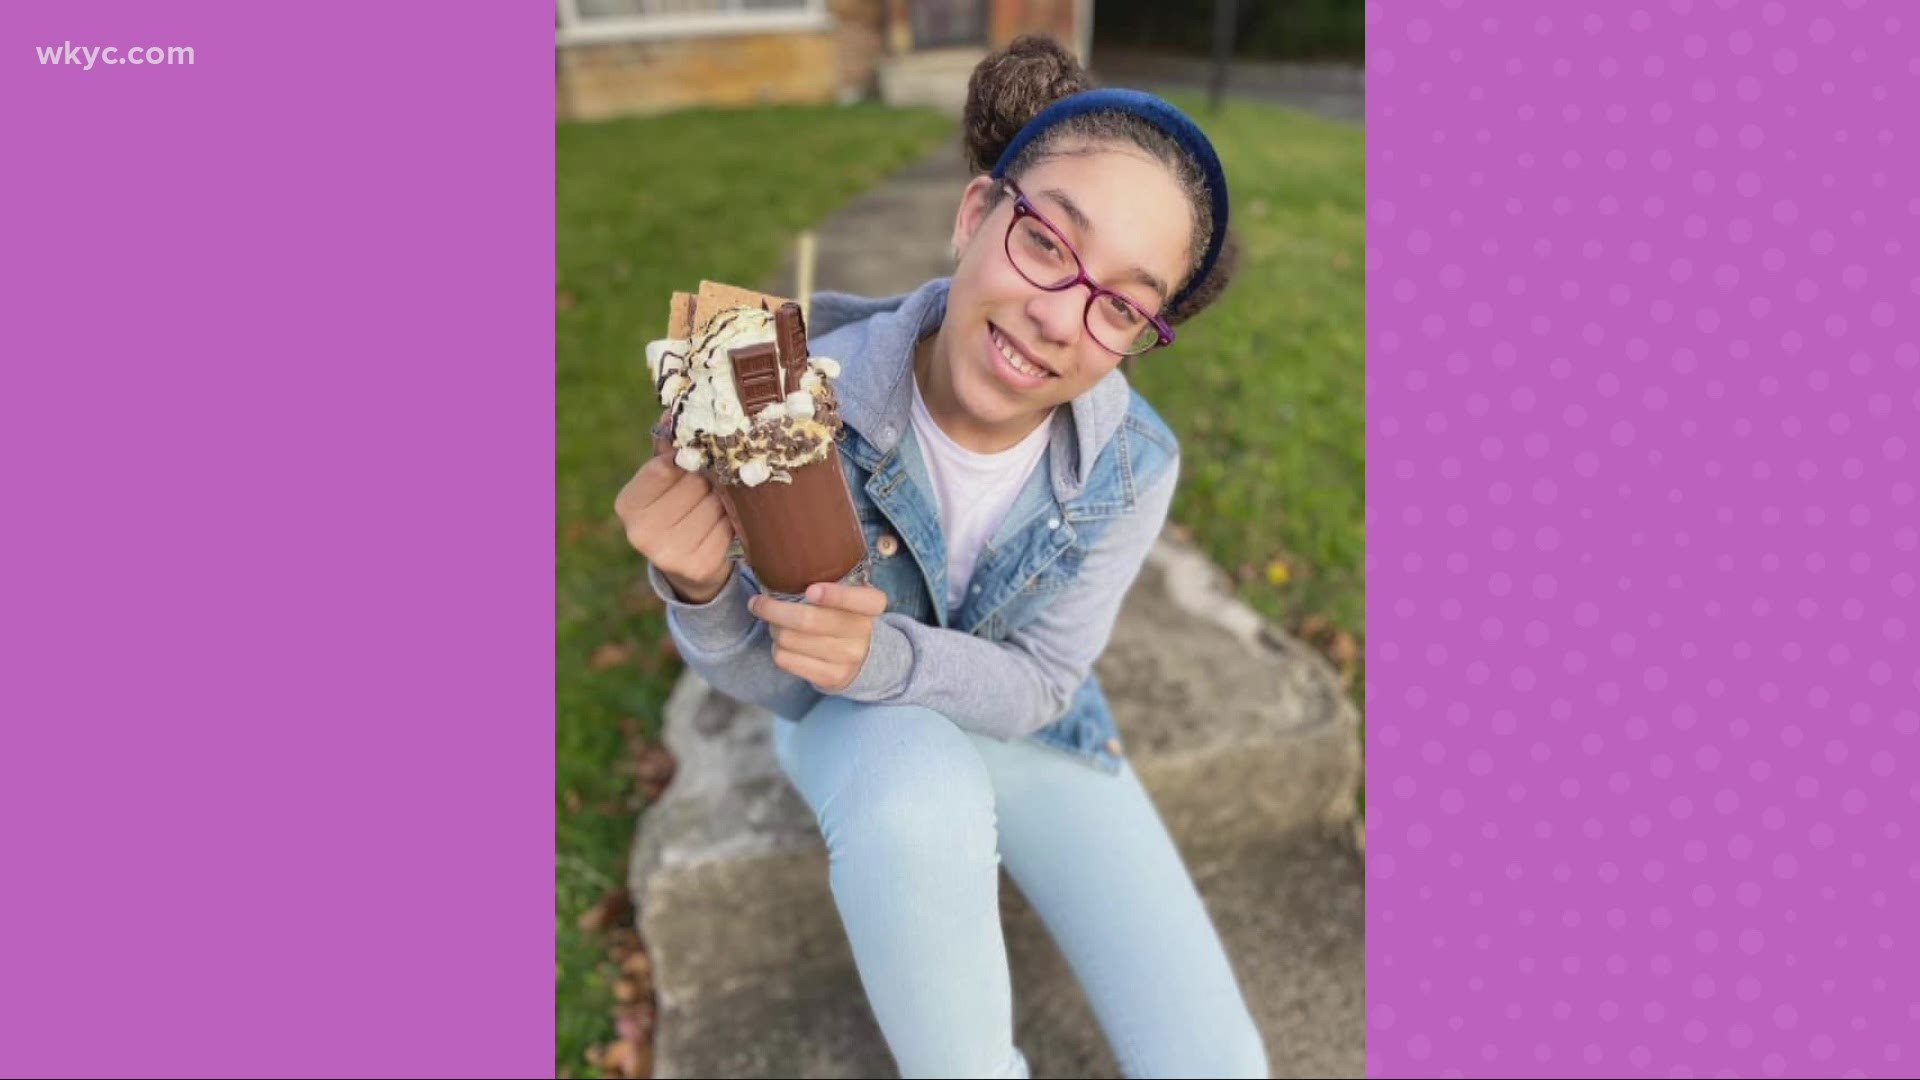 Jan. 19, 2021: Meet Cherish Marie. This 13-year-old girl loves all things chocolate. That's why she was gifted with her own chocolate business for her birthday.